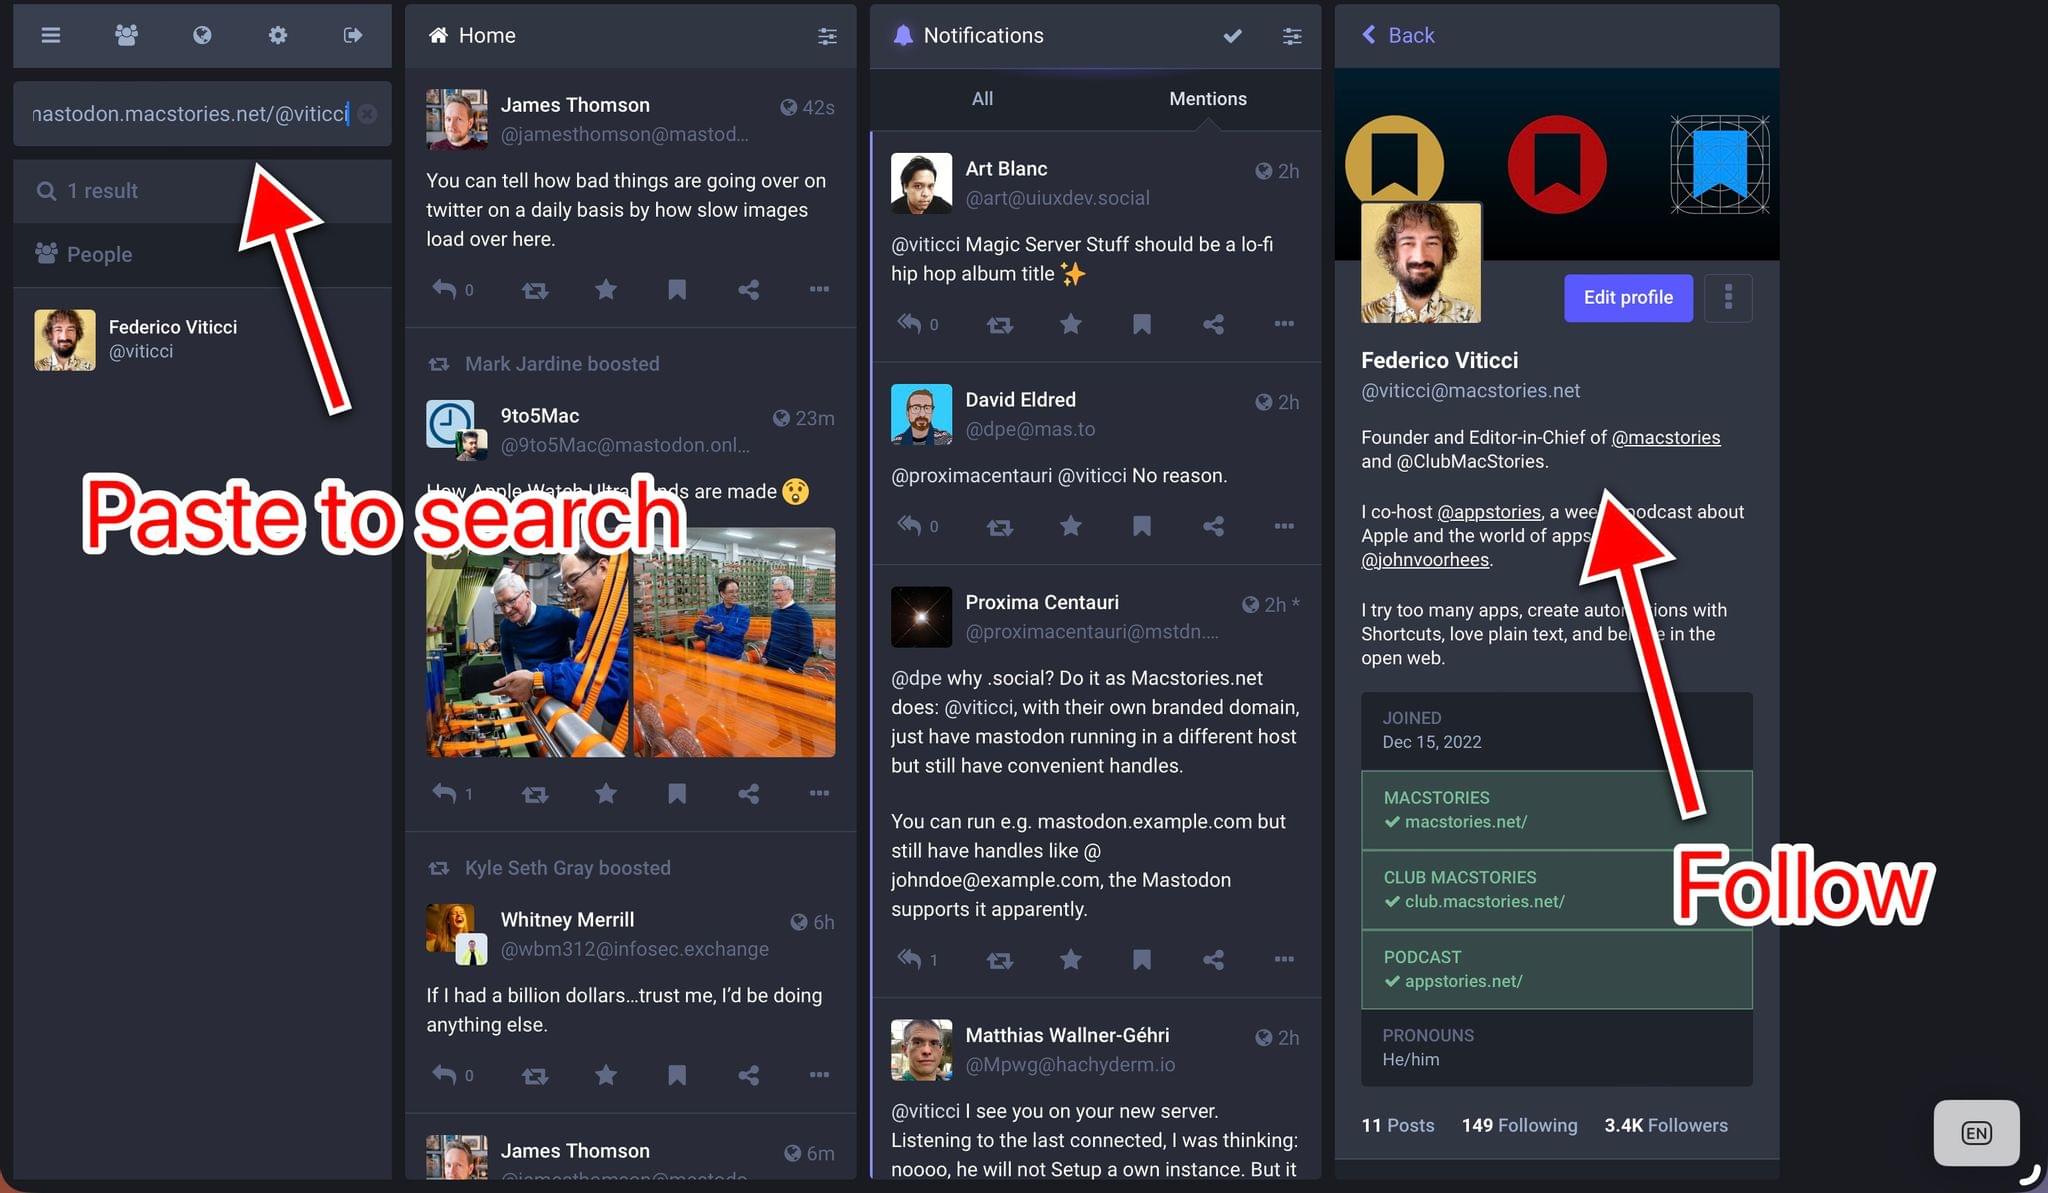 You can search for MacStories accounts and follow them from any Mastodon server.